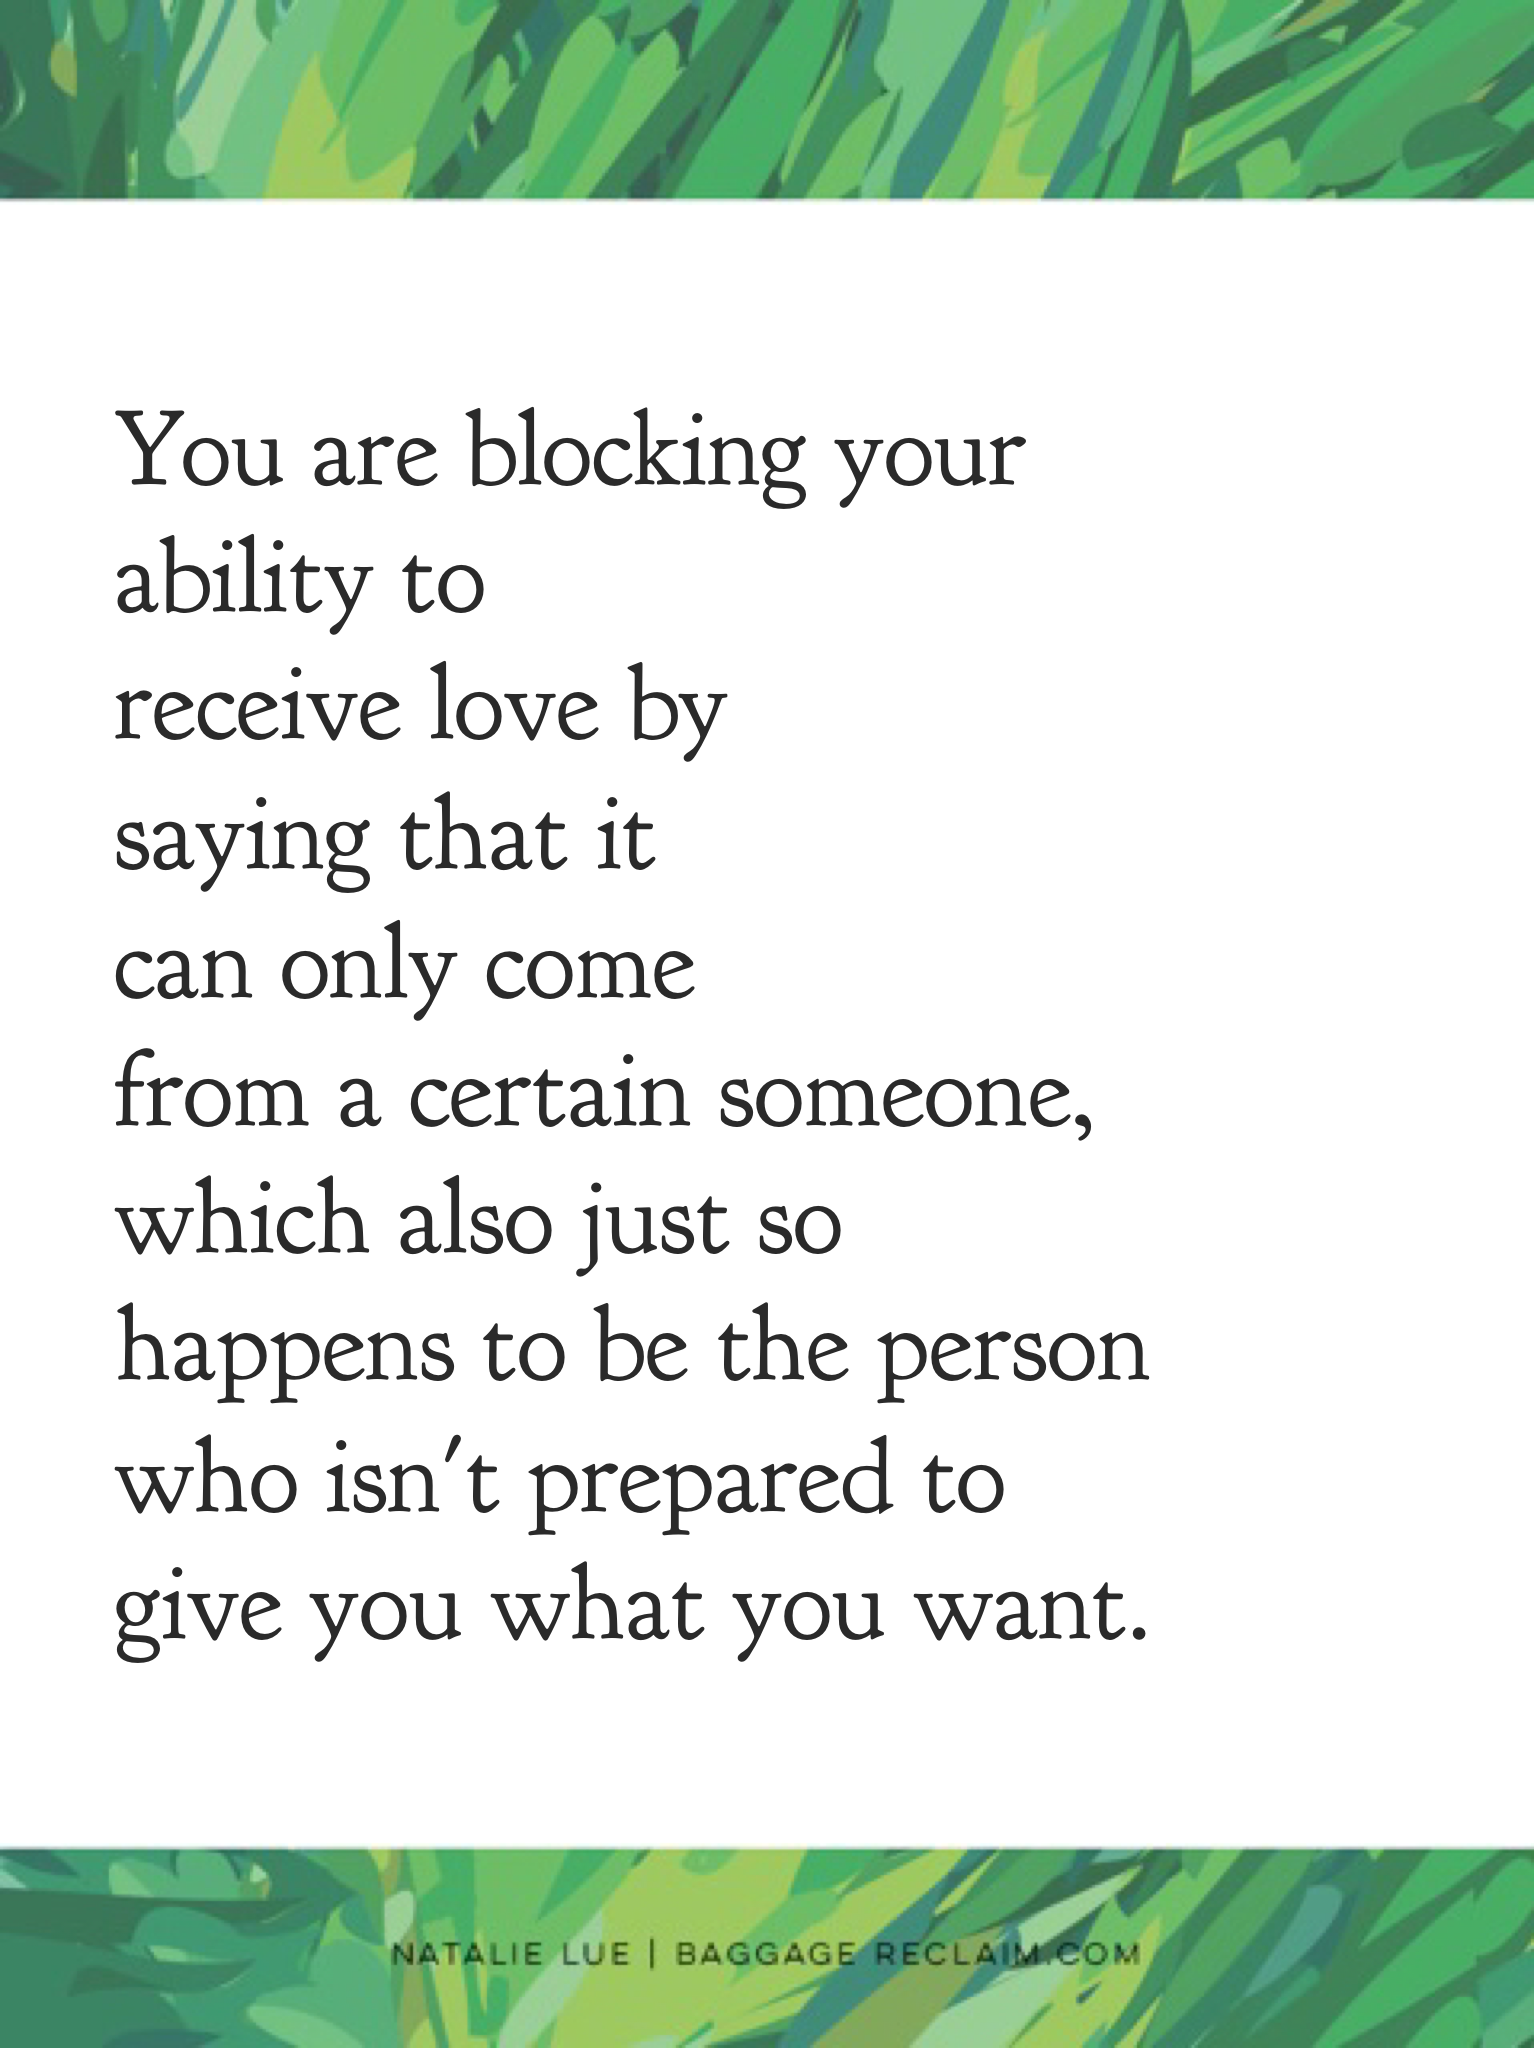 You are blocking your ability to receive love by saying that it can only come from a certain someone, which also just so happens to be the person who isn't prepared to give you what you want.